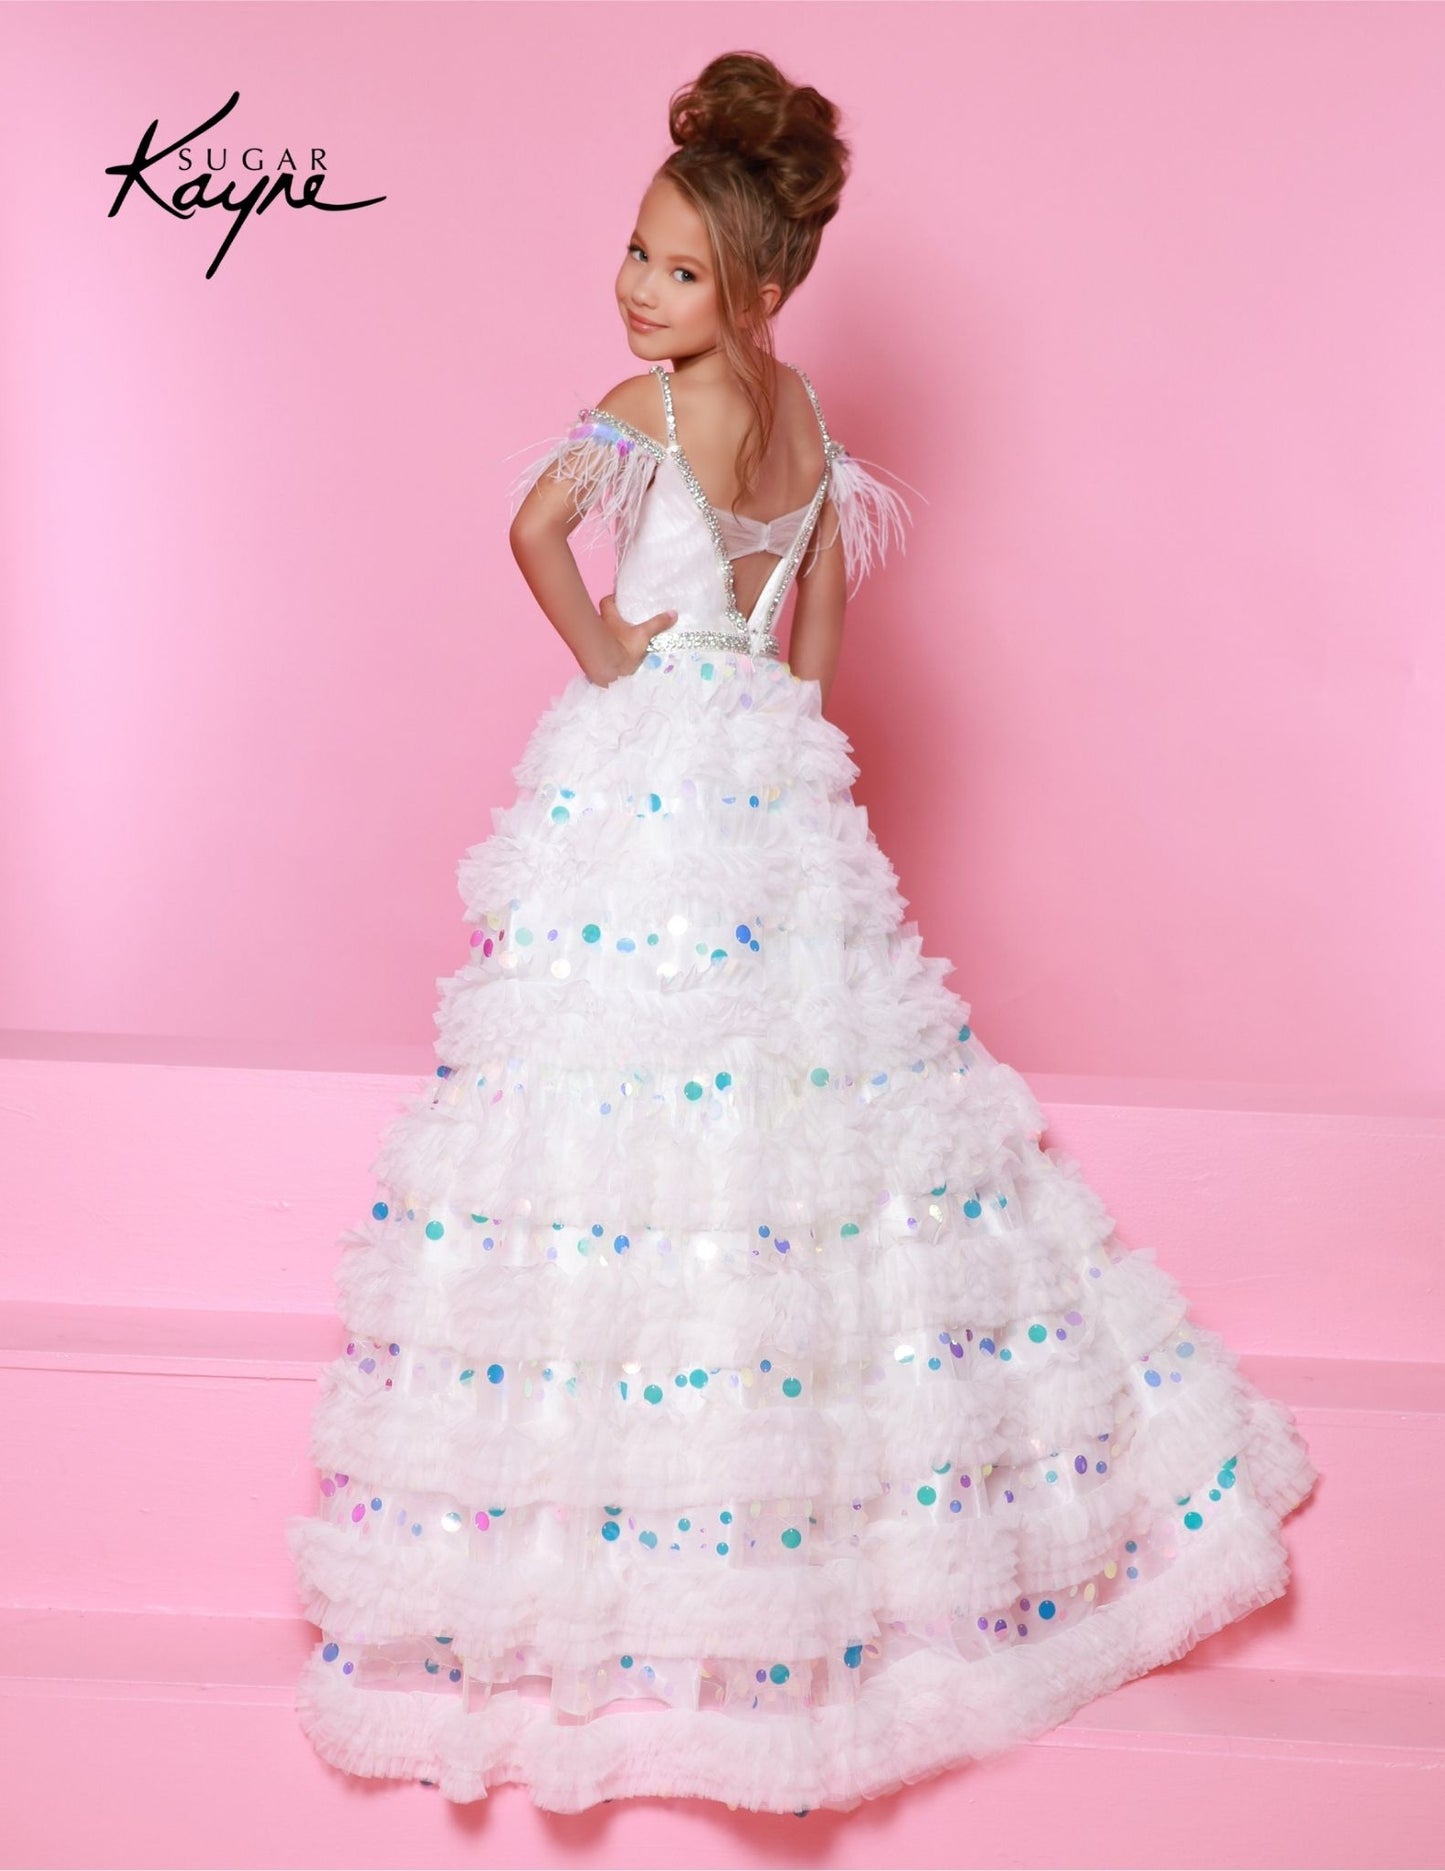 Sugar Kayne C342 is a long layered ruffled A-line ballgown designed specifically for preteen girls who want to make a statement. This one of a kind dress features off-shoulder details and feathers for an added touch of elegance. Perfect for any pageant or special occasion. Dress like the true princess you are! This enchanting mesh ballgown featuring ruffles on the skirt is designed to make you shine bright on the stage!